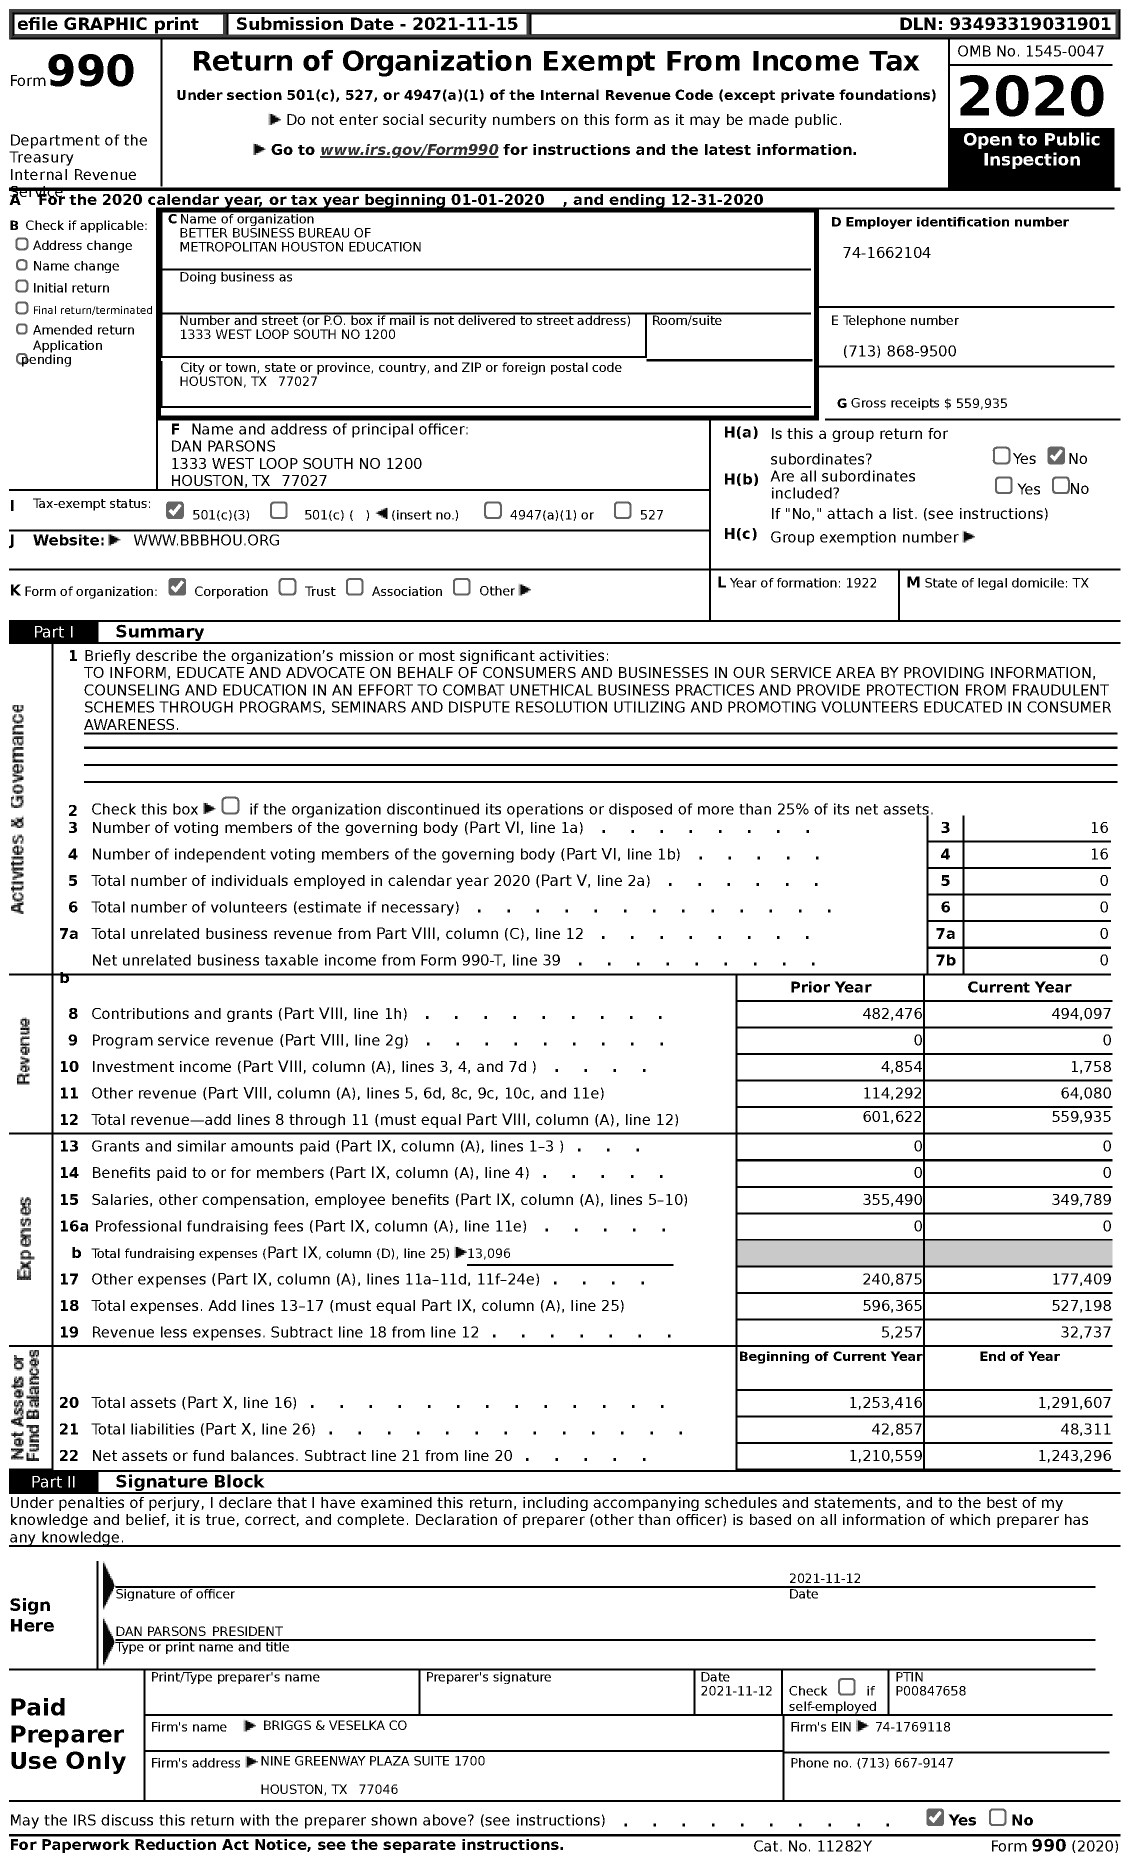 Image of first page of 2020 Form 990 for Better Business Bureau of Metropolitan Houston Educational Foundation